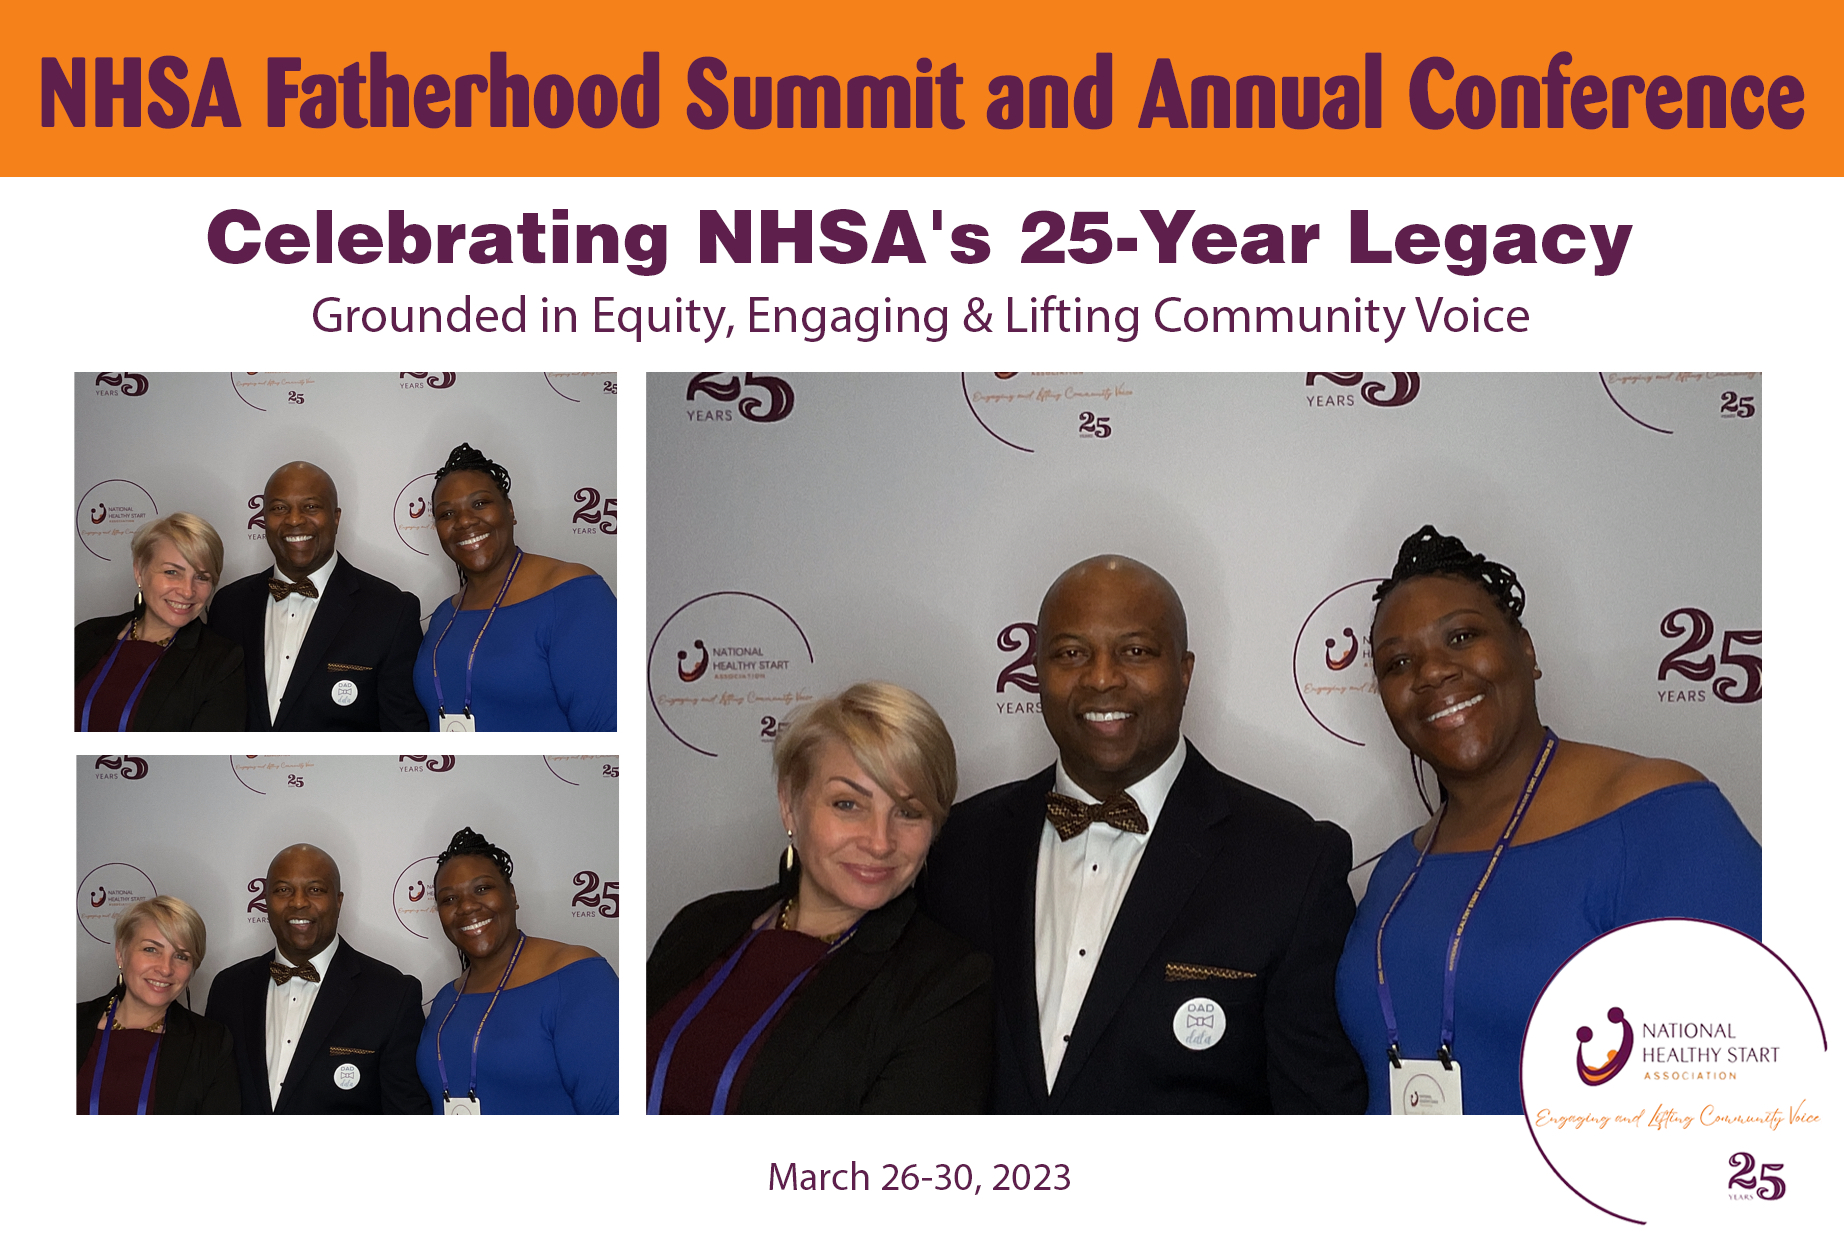 NHSA's Fatherhood Summit and Annual Conference 23'